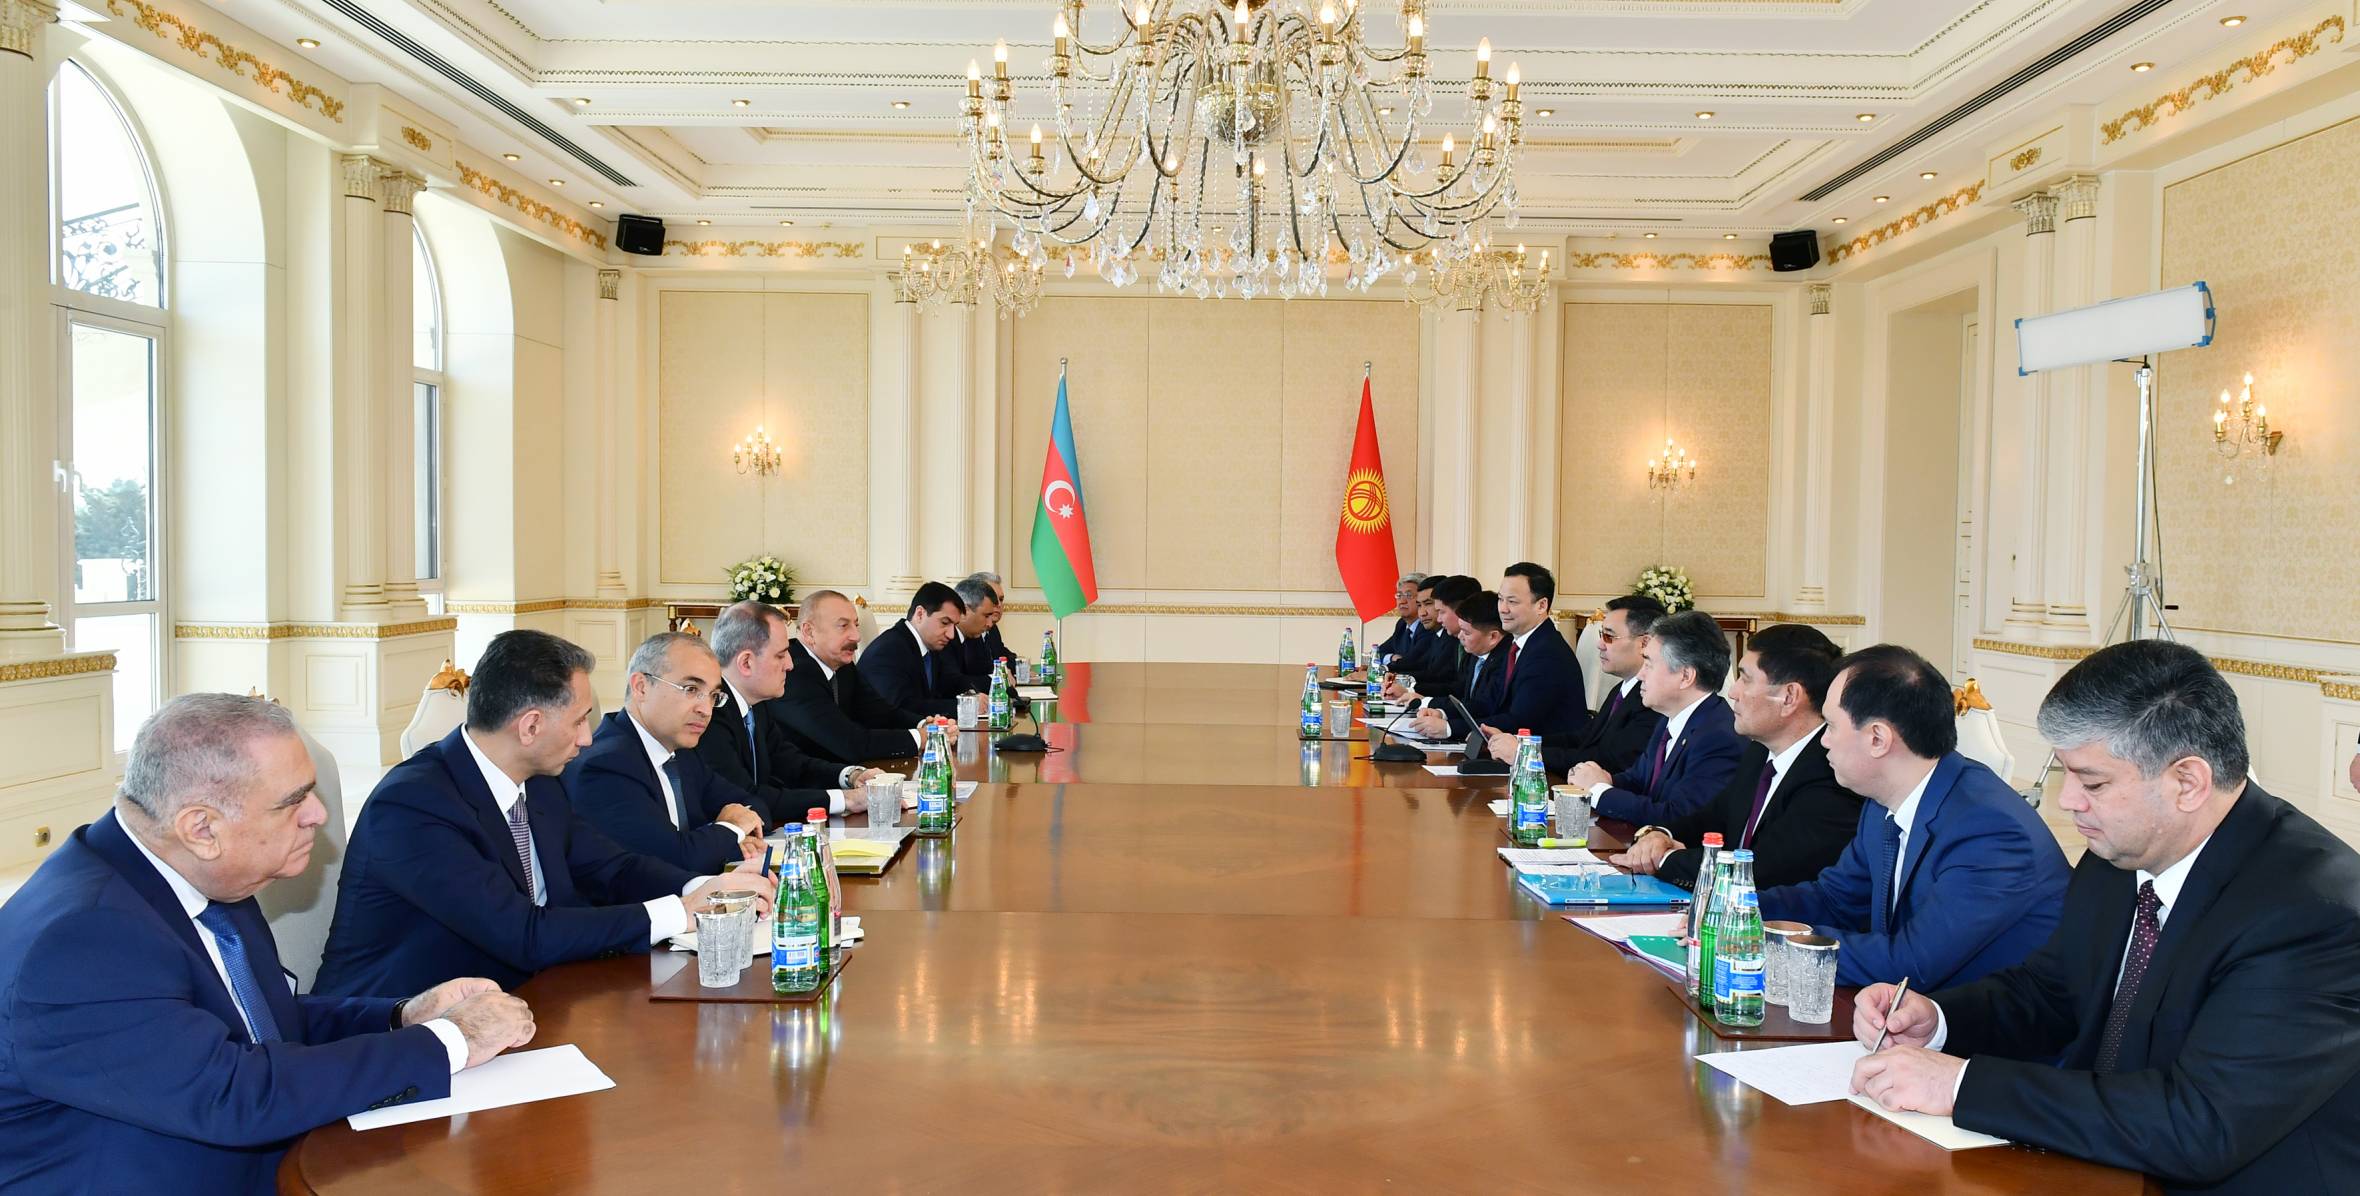 The presidents of Azerbaijan and Kyrgyzstan held an expanded meeting